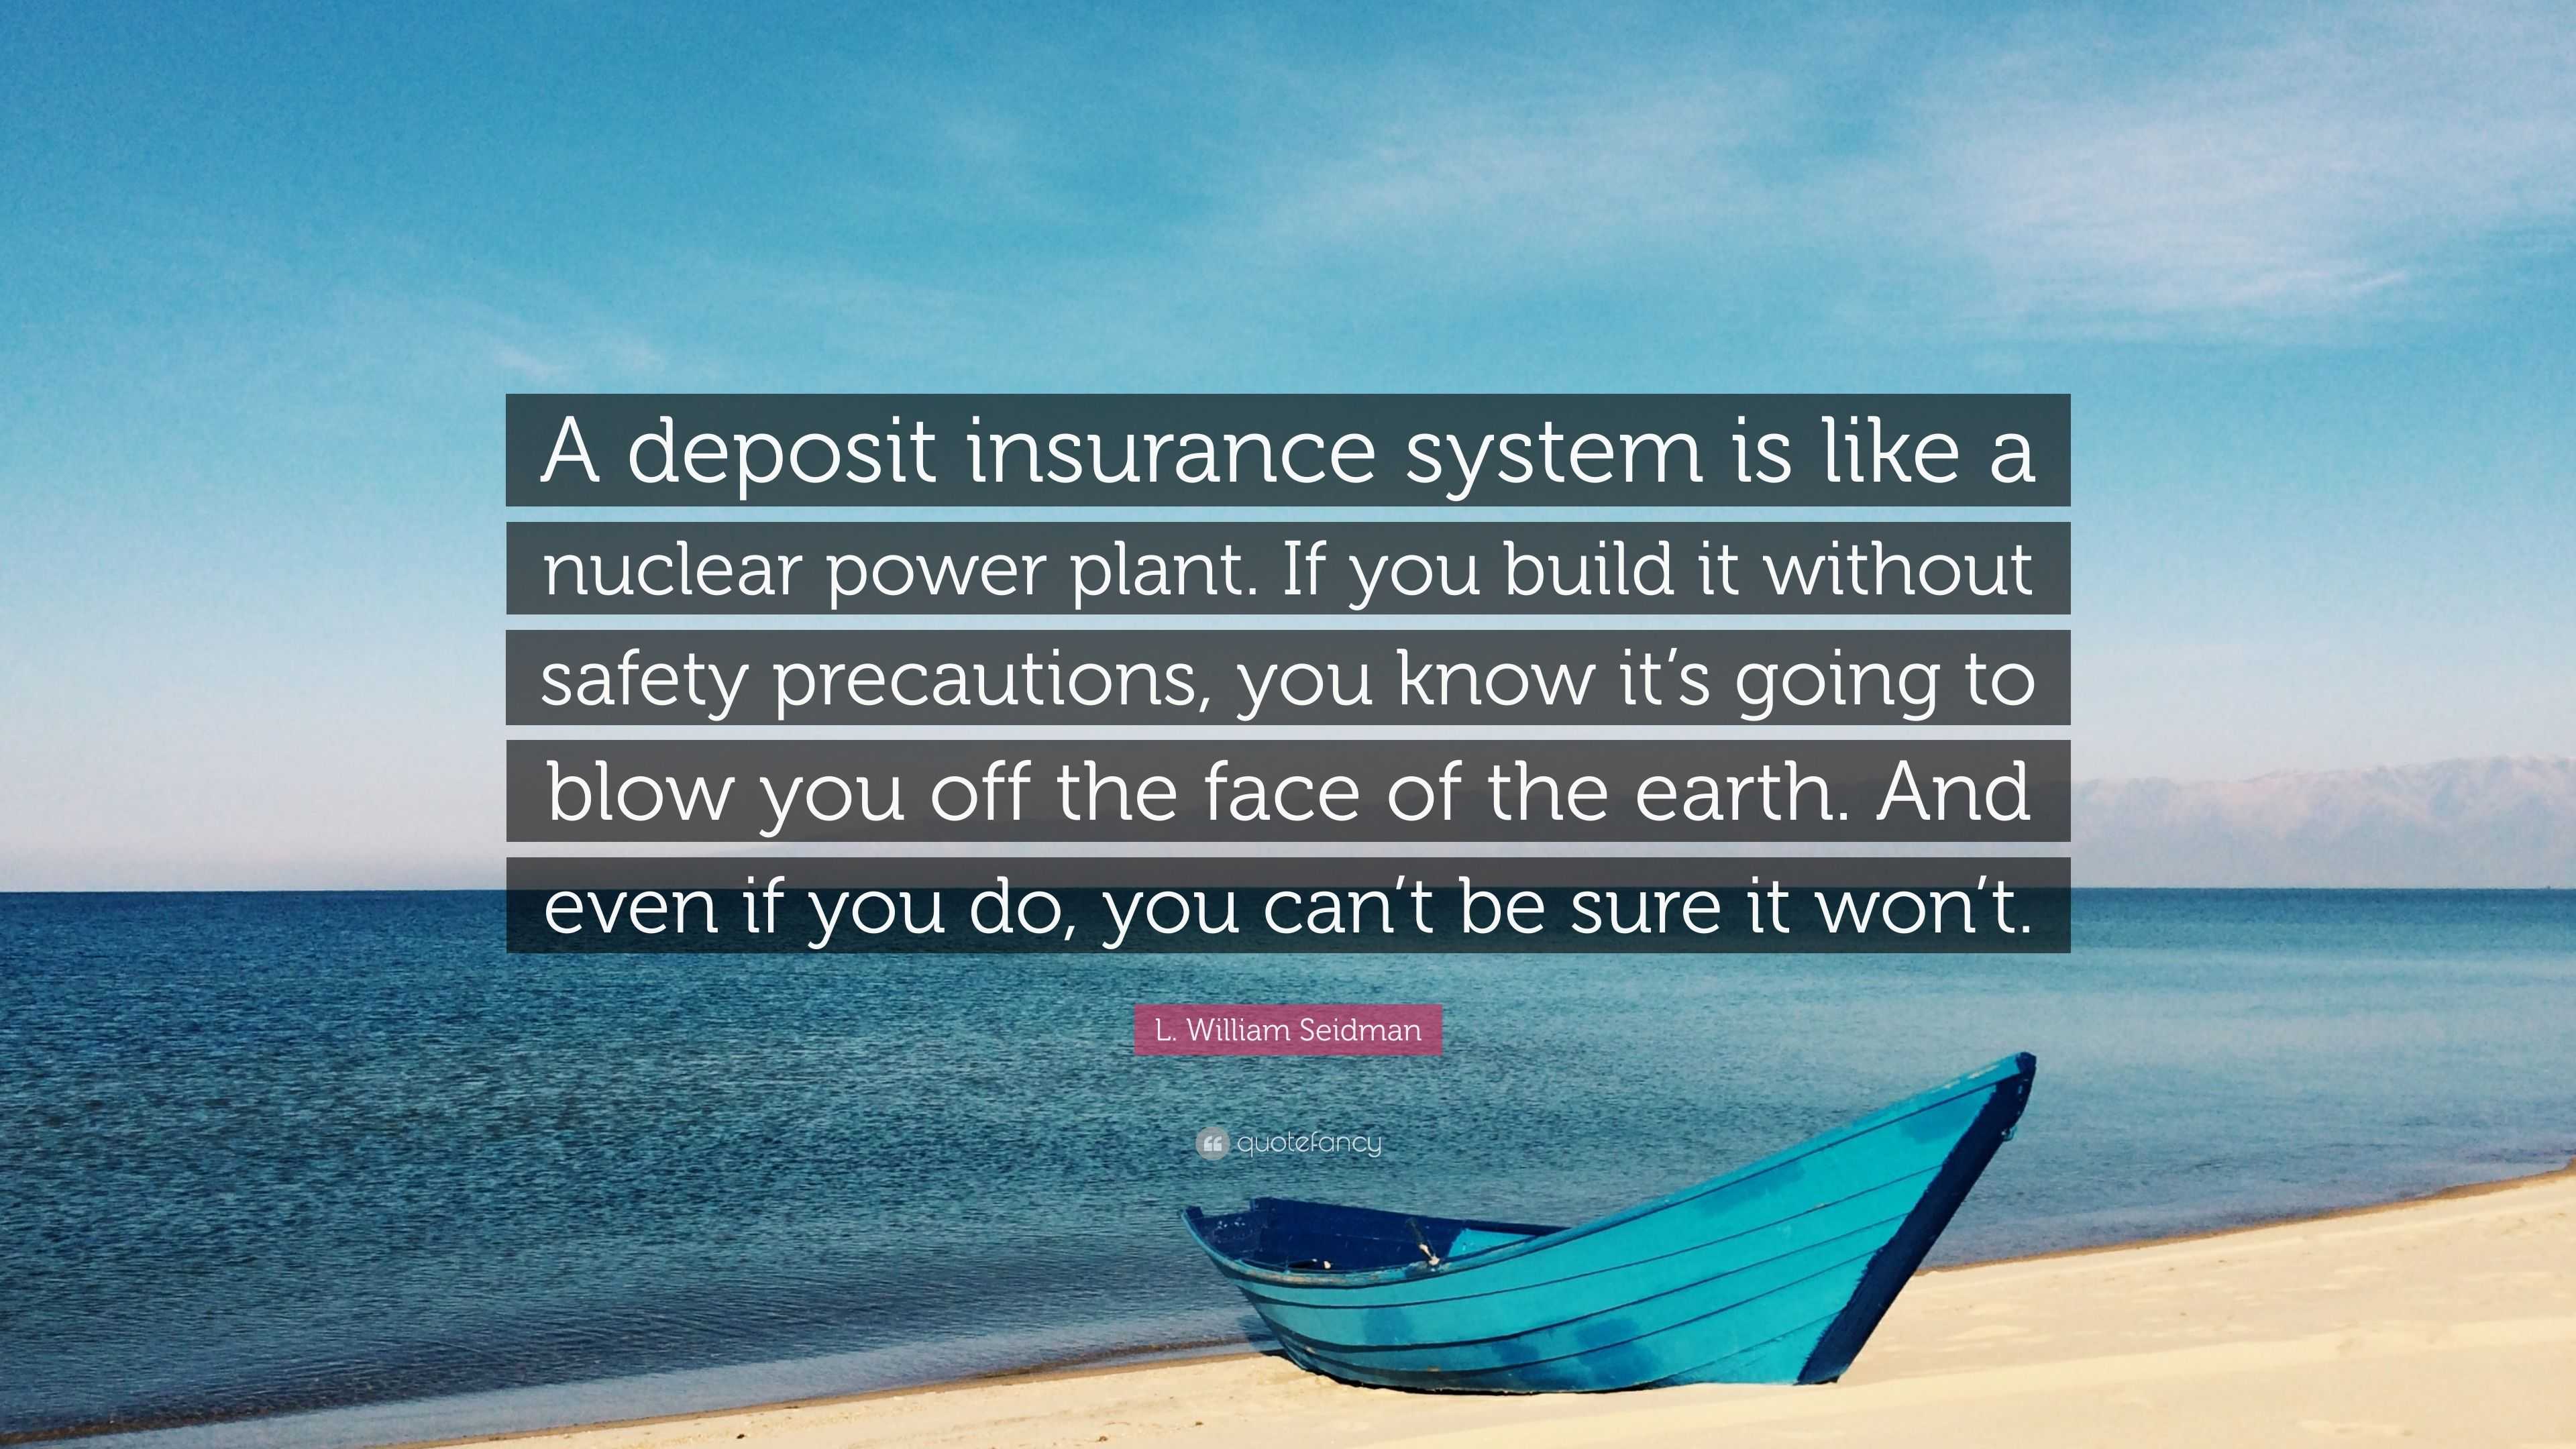 L. William Seidman Quote “A deposit insurance system is